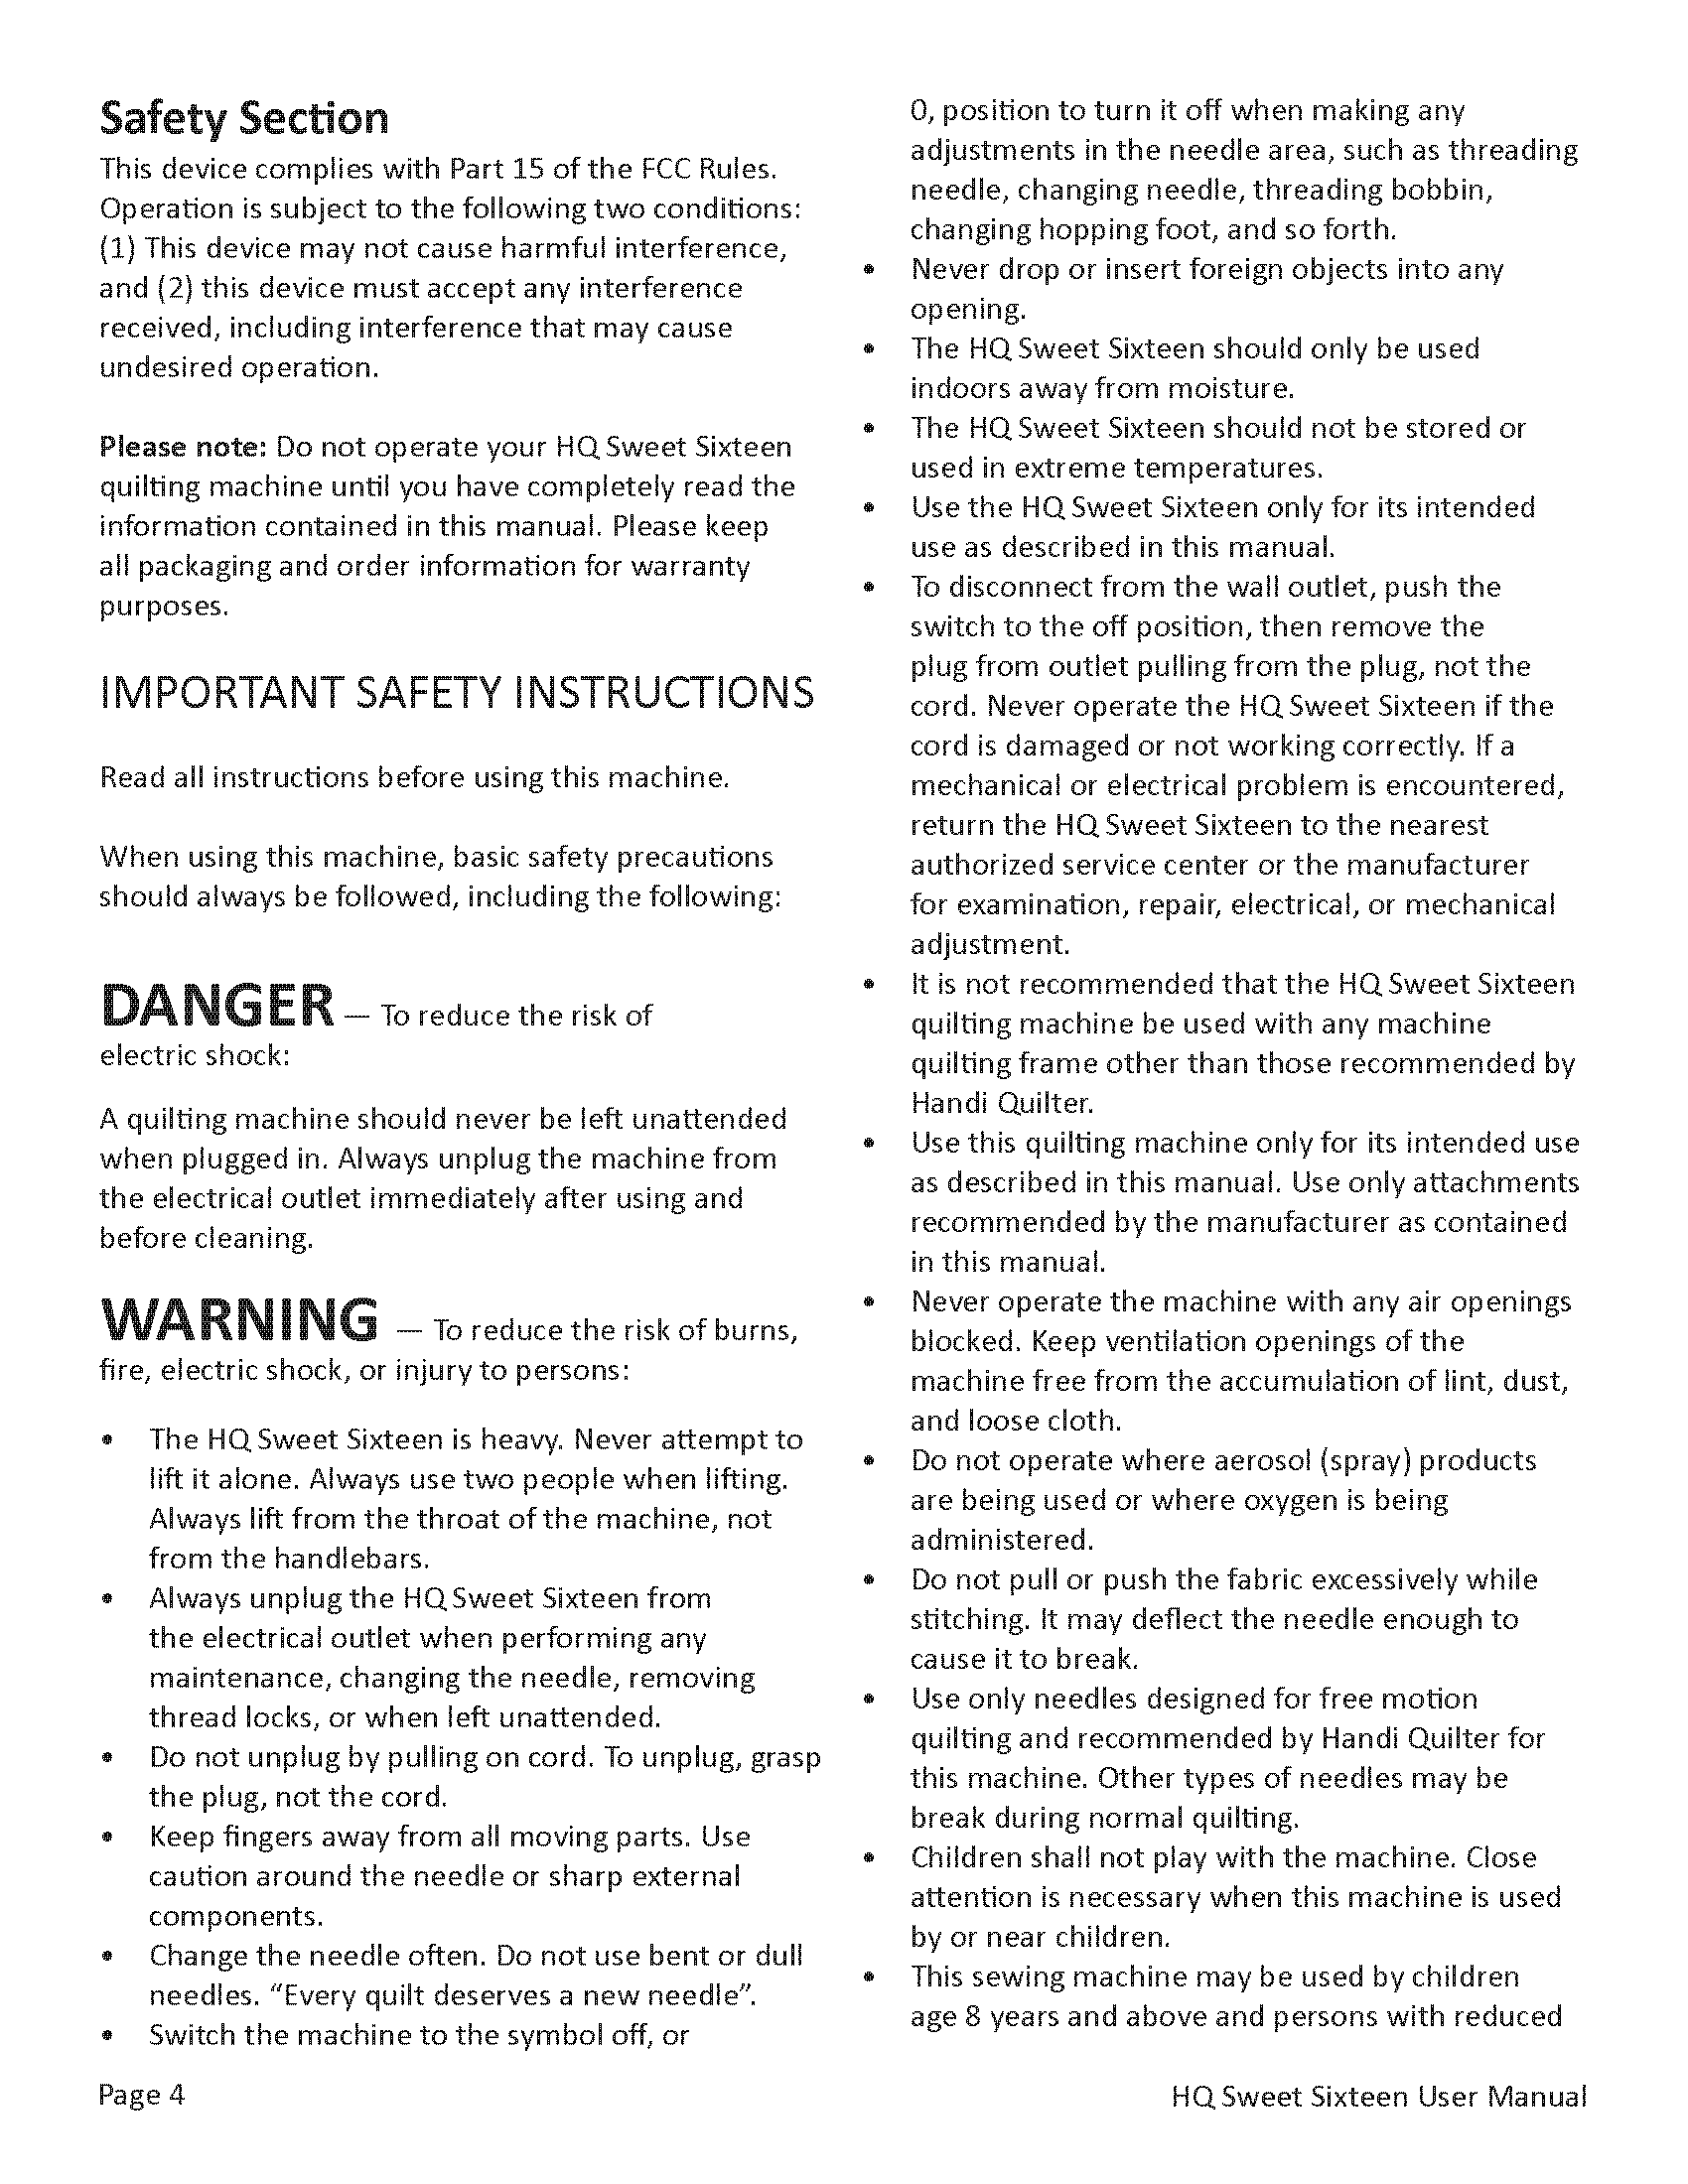 HQ-Sweet-Sixteen-User-Manual-V3.1_Page_05.png